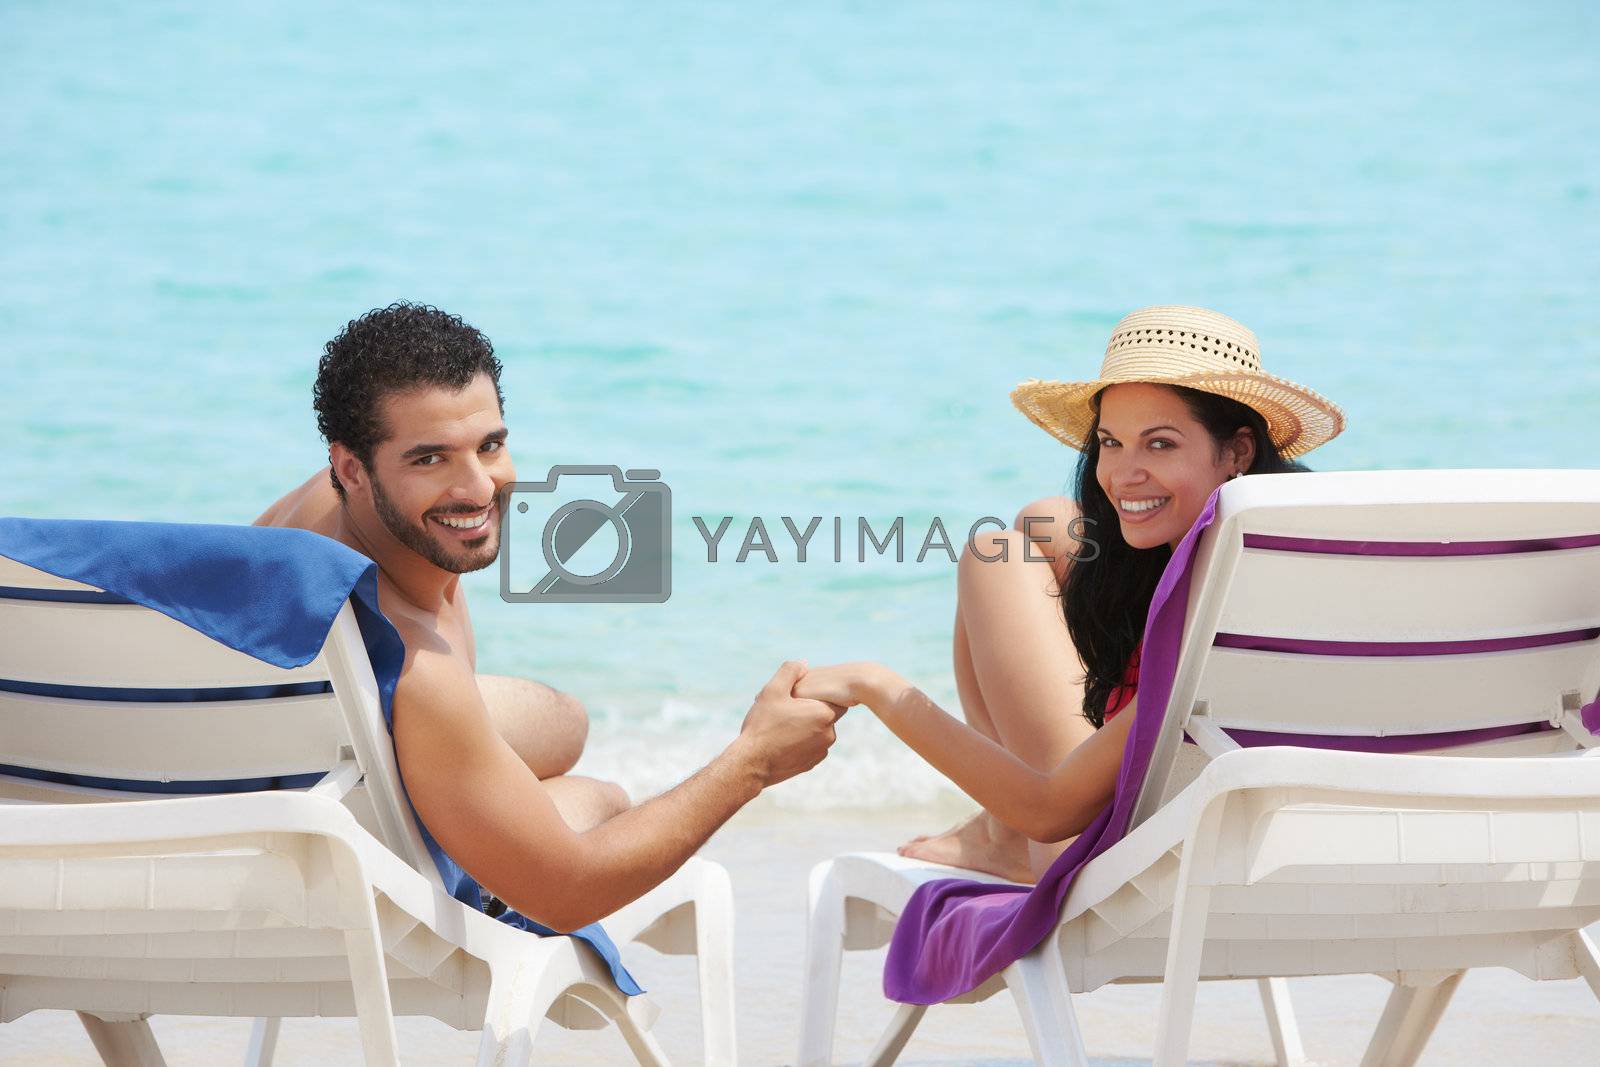 Royalty free image of man and woman doing honeymoon in cuba by diego_cervo